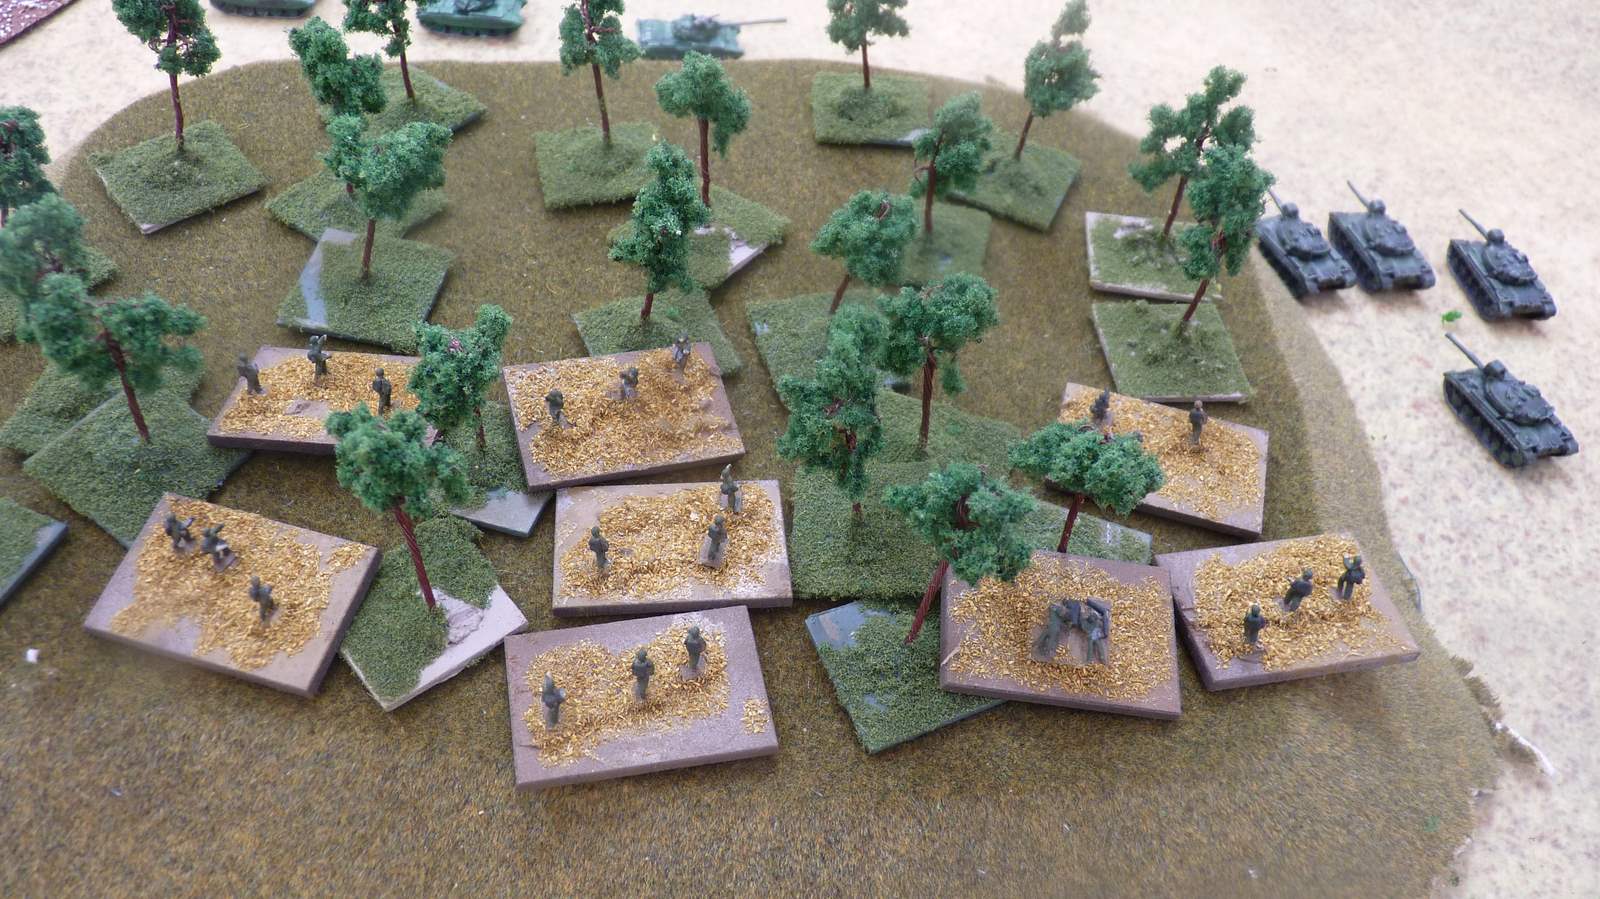 Turkish infantry dismount and seize the wooded hill